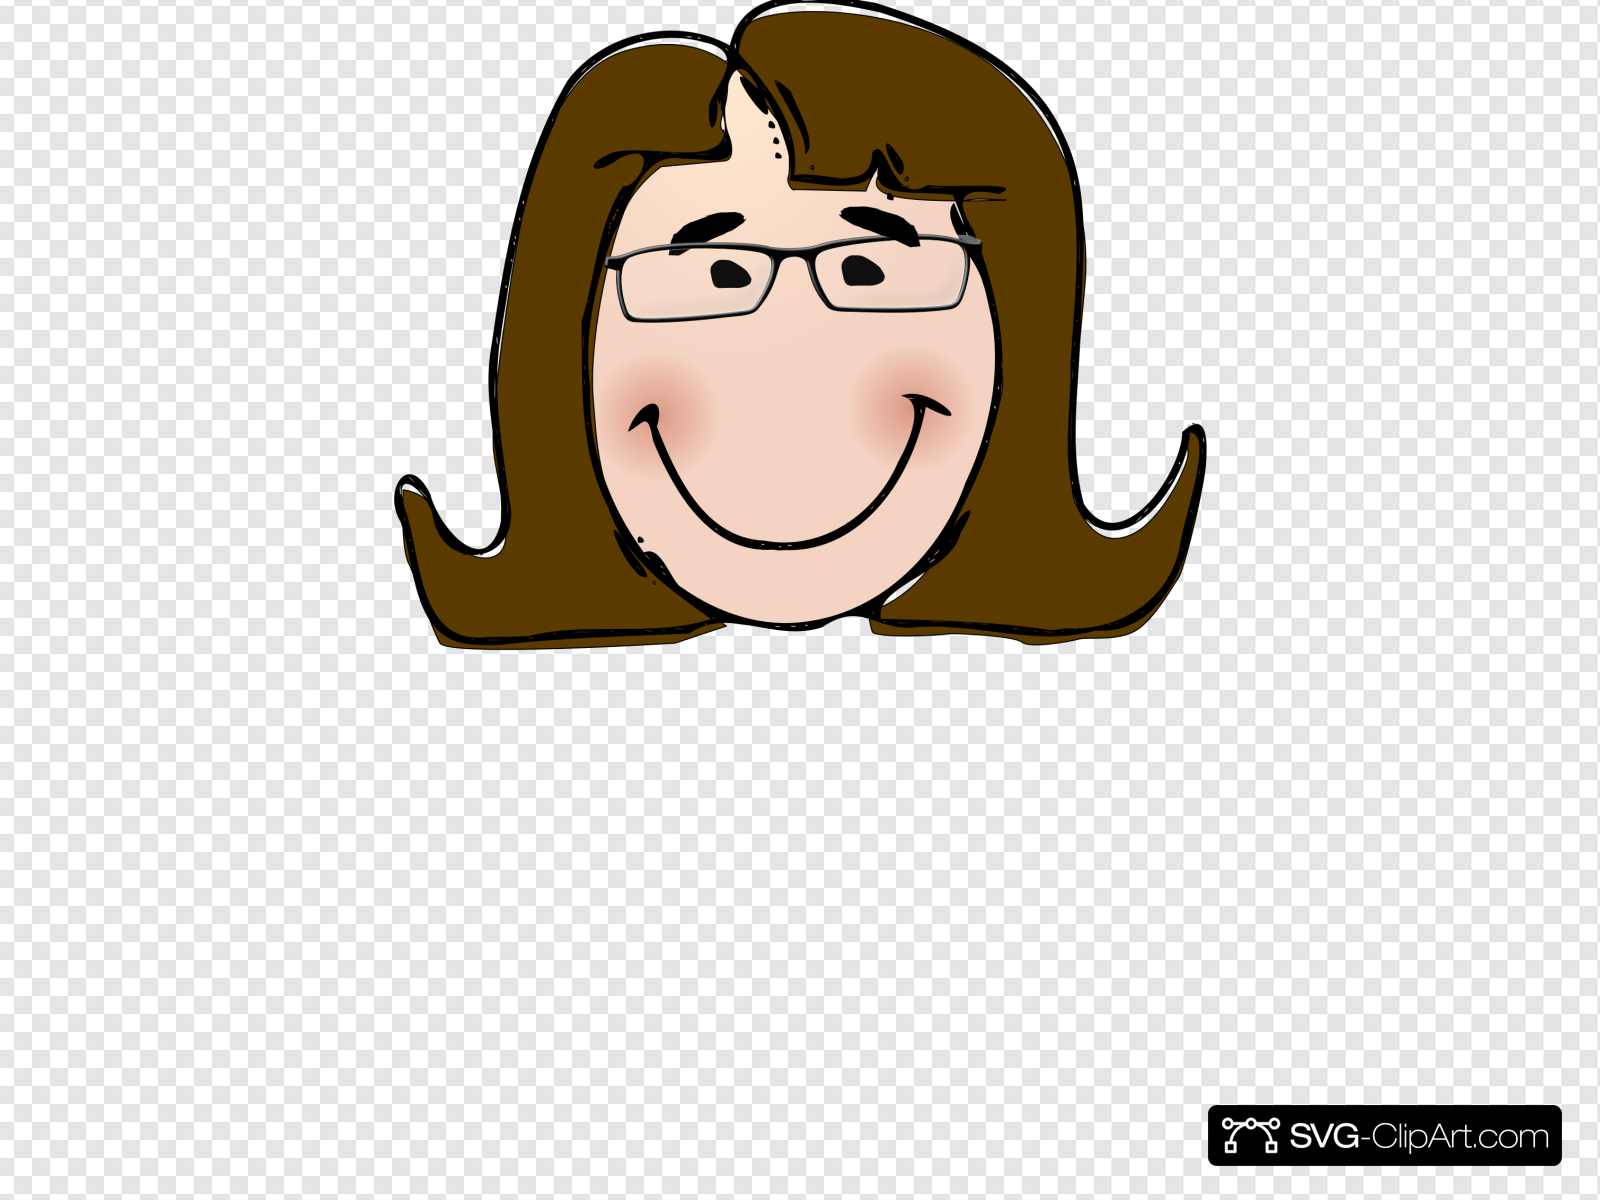 With clip art icon. Glasses clipart woman